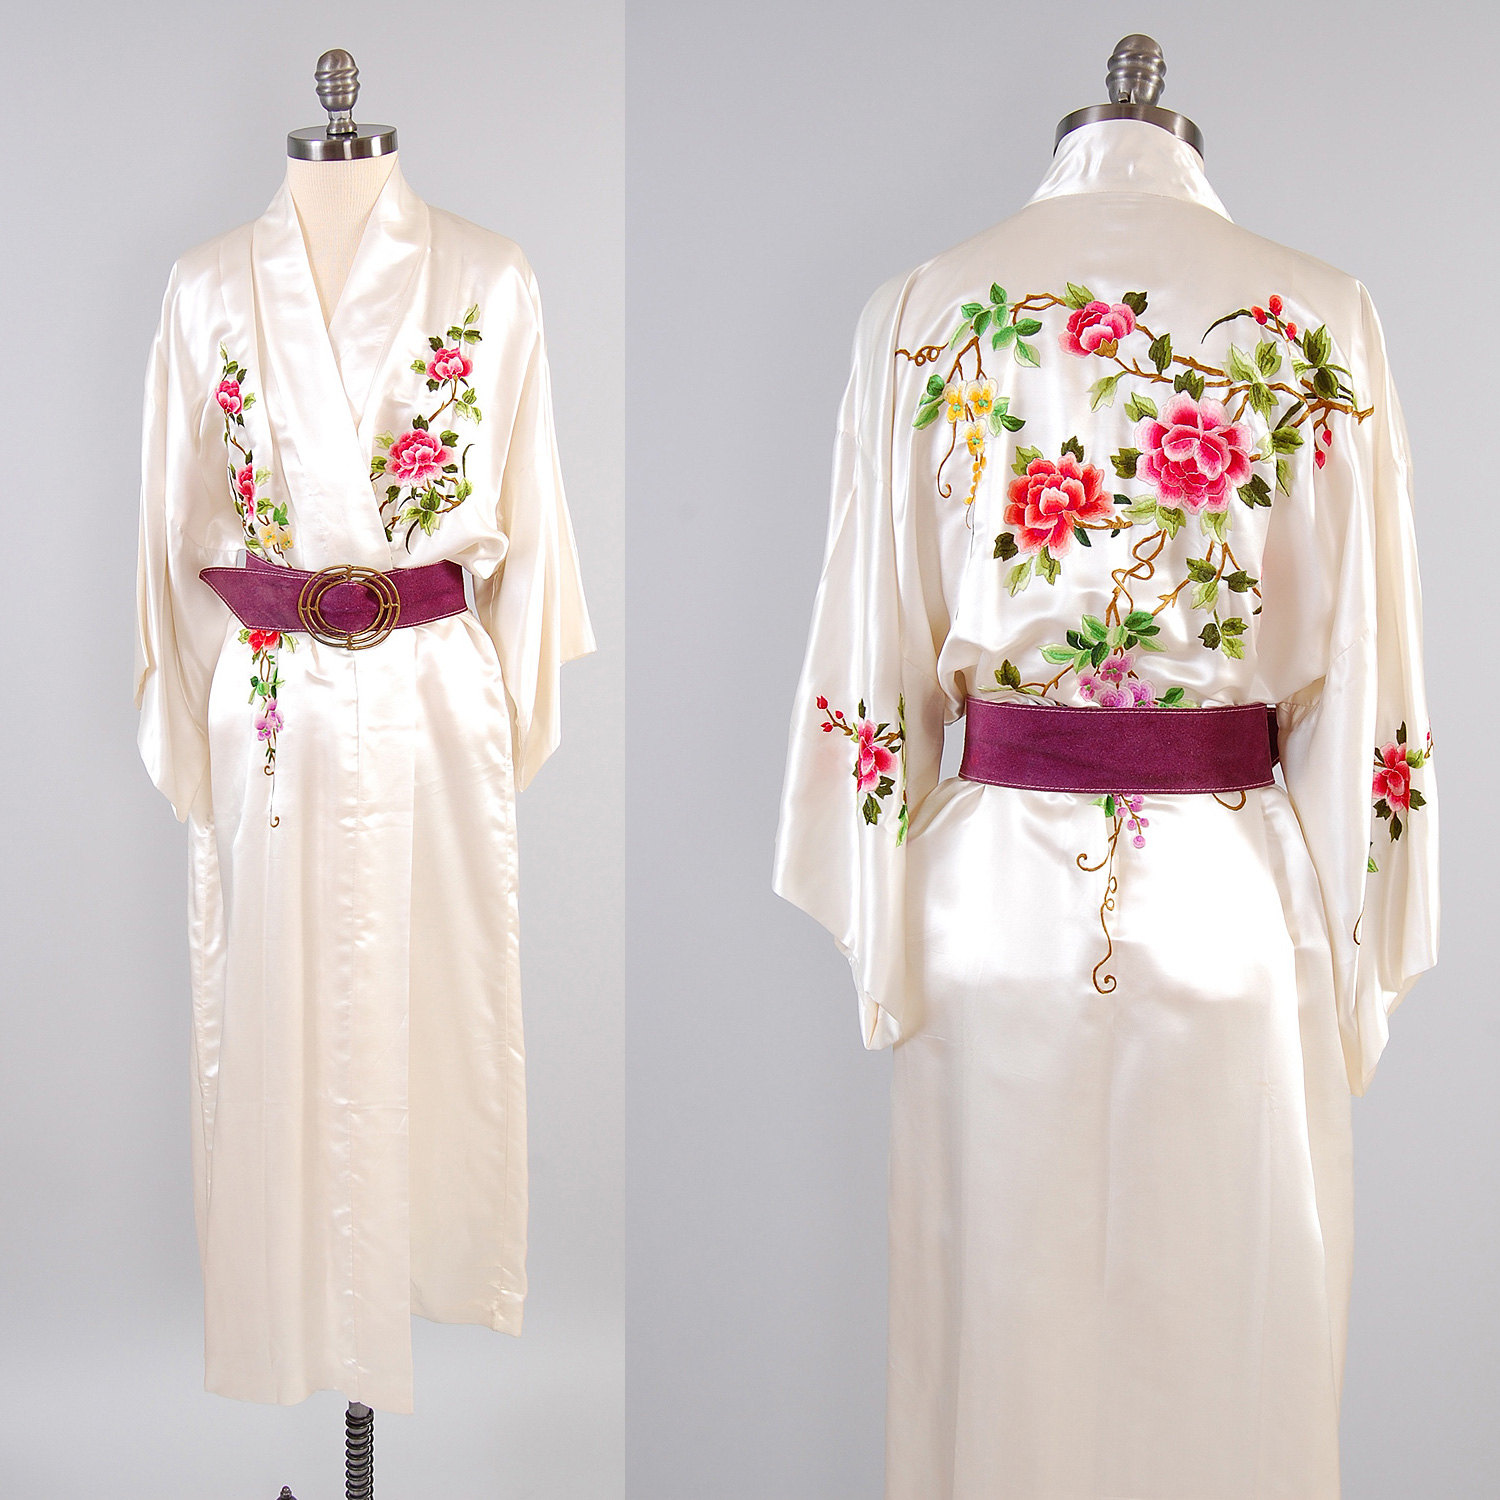 embroidered floral robe etsy